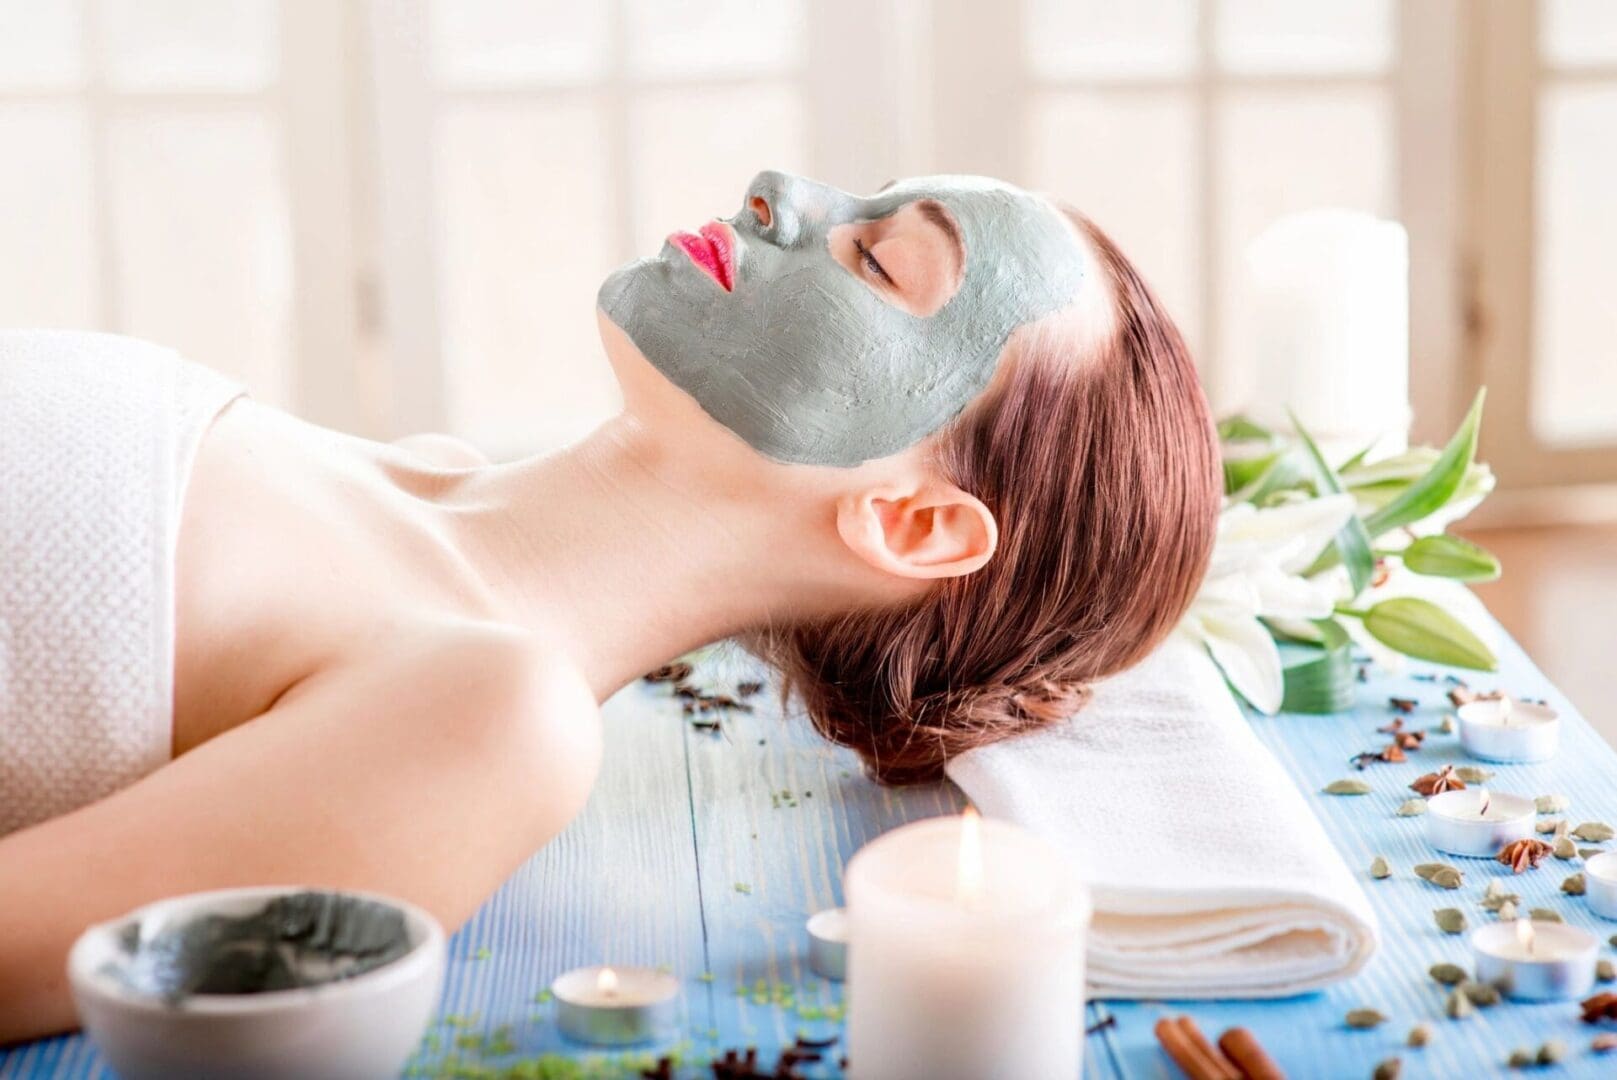 A woman is enjoying an eco-friendly clay mask session at a sustainable spa.